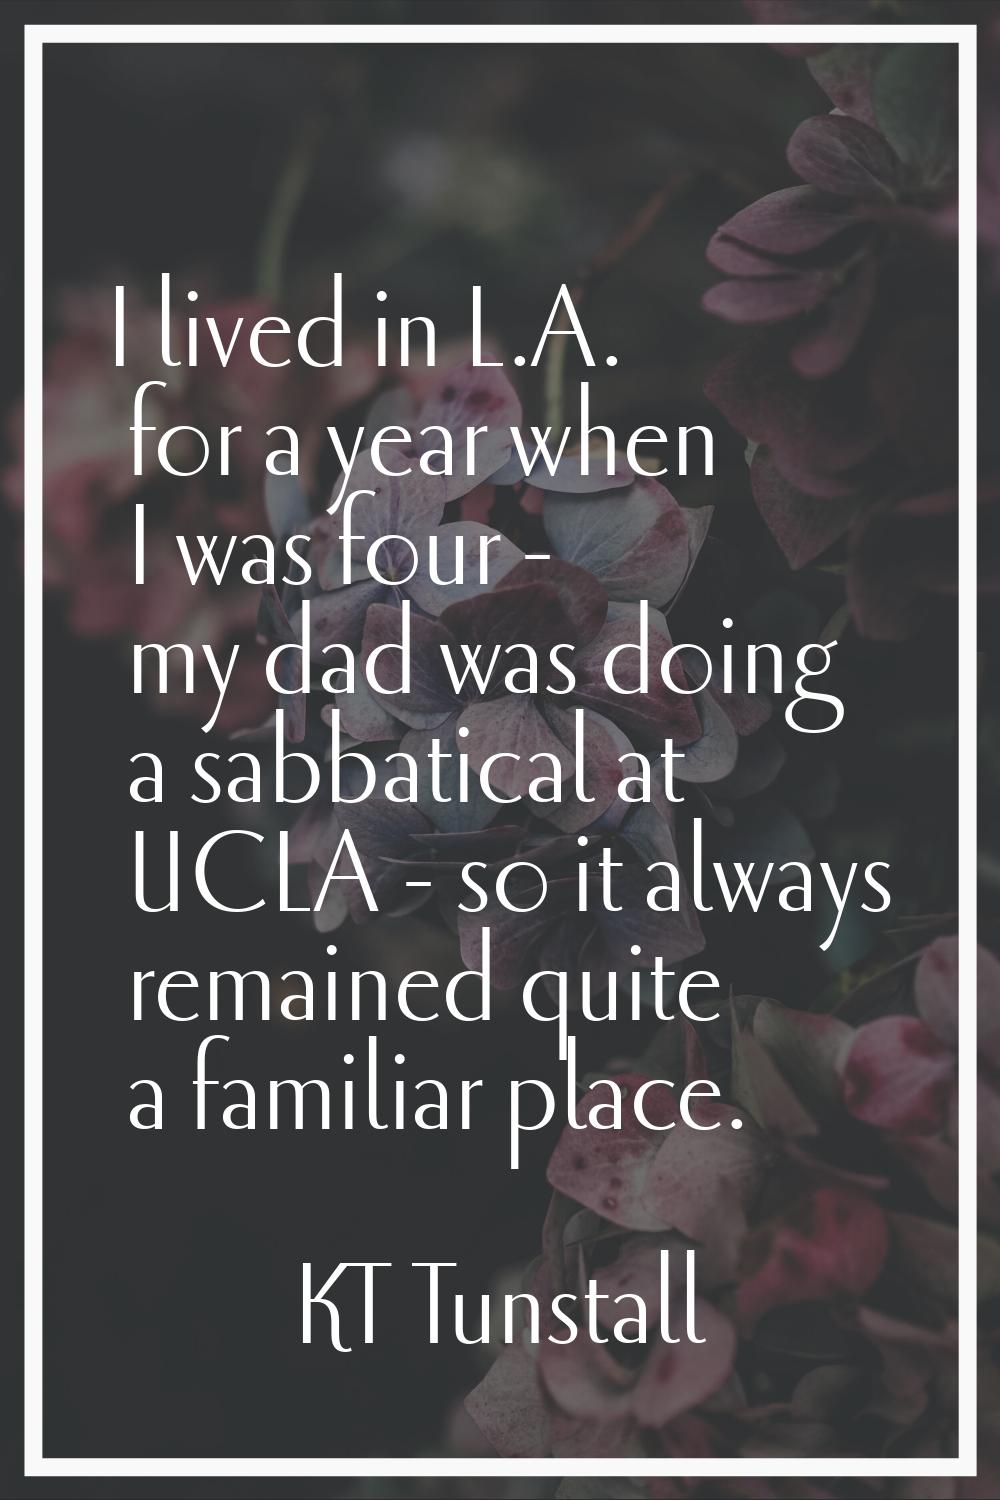 I lived in L.A. for a year when I was four - my dad was doing a sabbatical at UCLA - so it always r